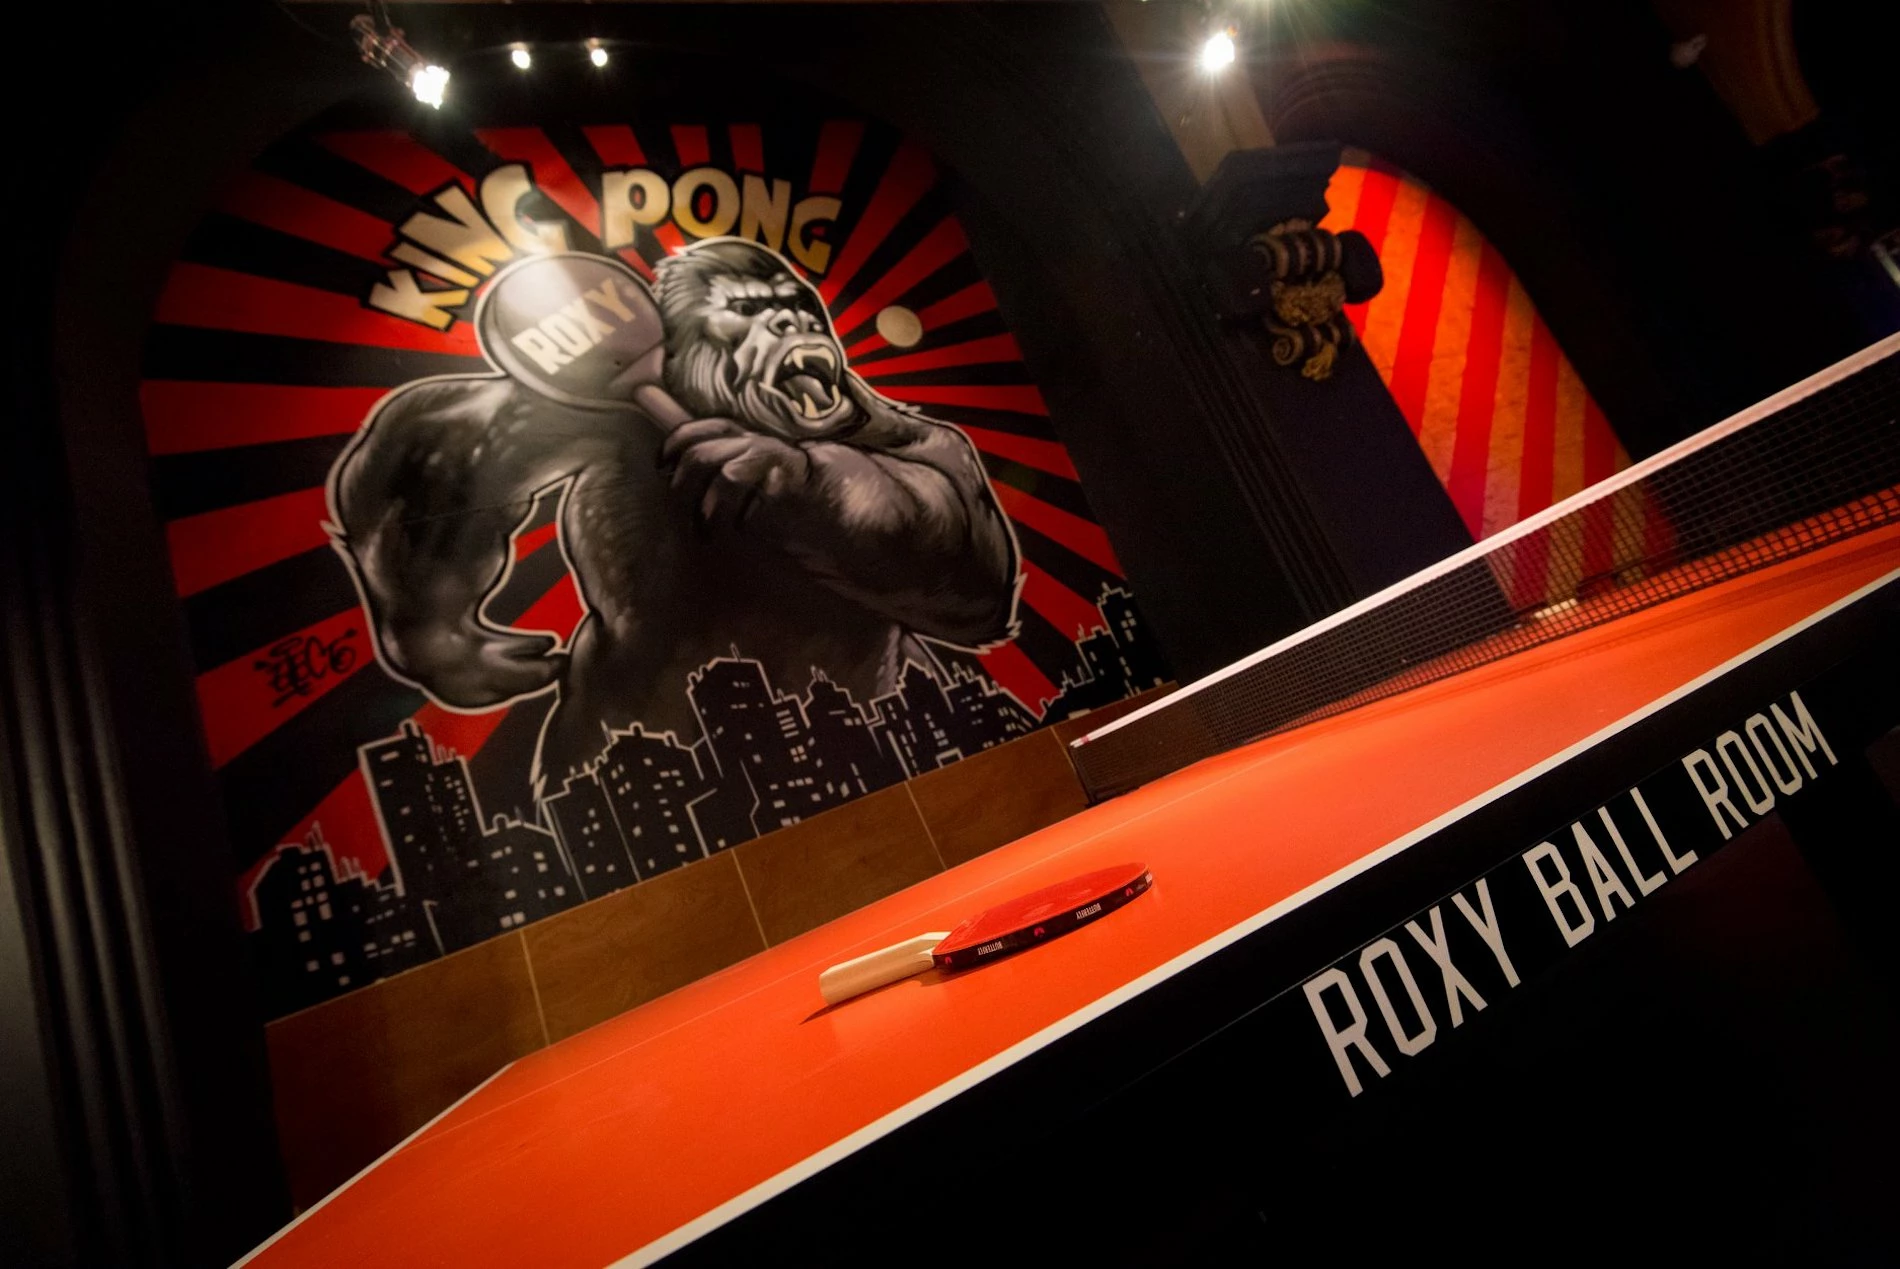 Roxy Ball Room is coming to Merrion Street with its second party-centric gaming bar 